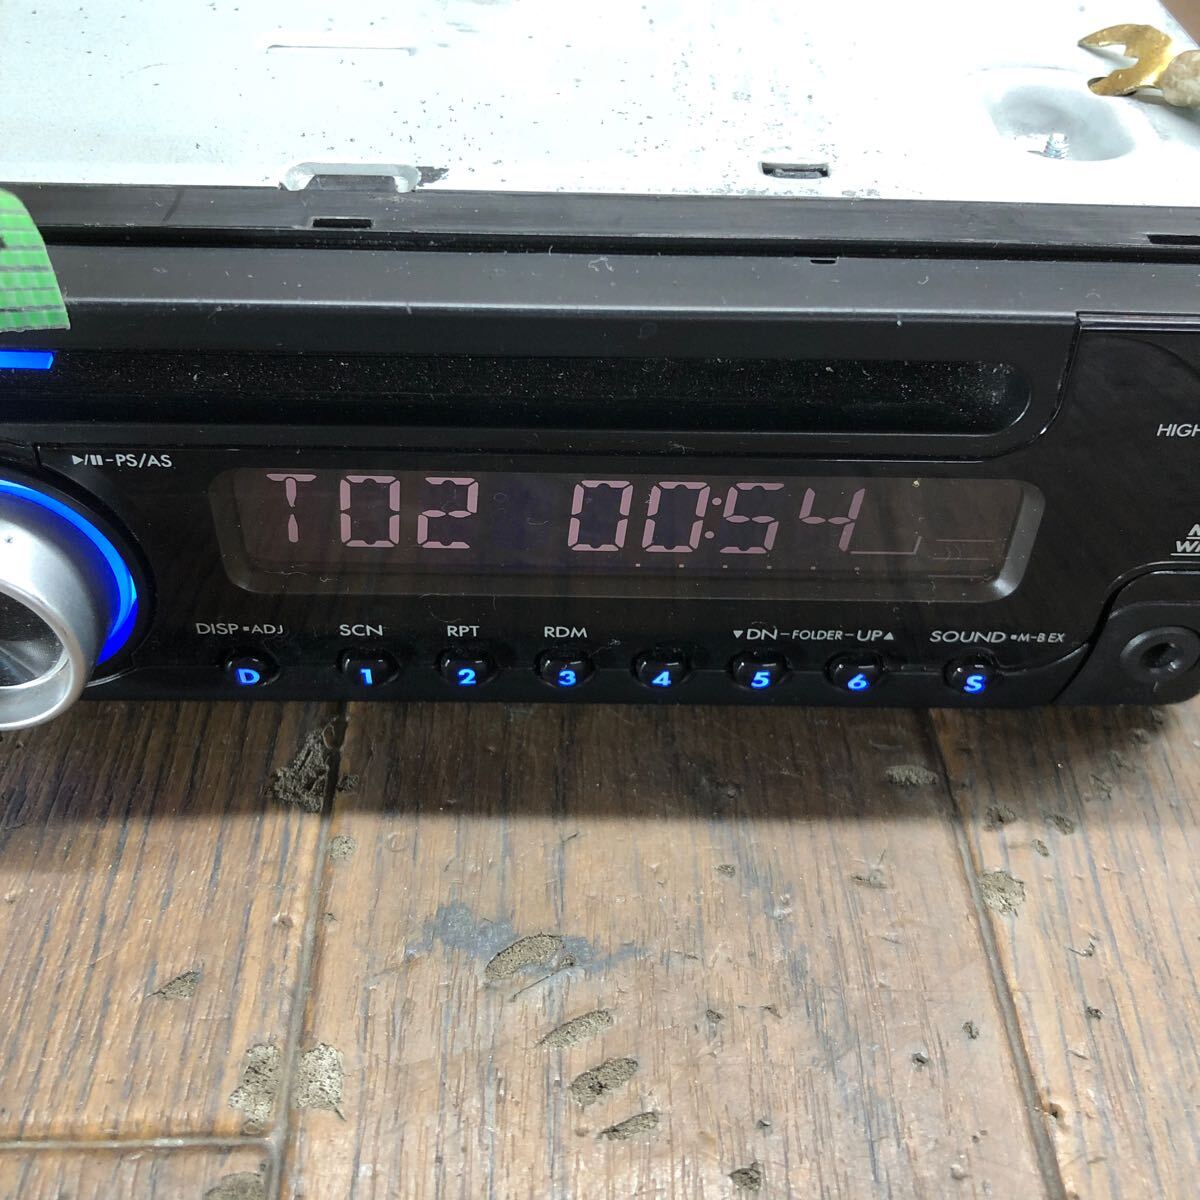 AV3-214 super-discount car stereo CD player clarion CZ109 PA-3273T 0015565 CD FM/AM AUX simple operation verification ending used present condition goods 